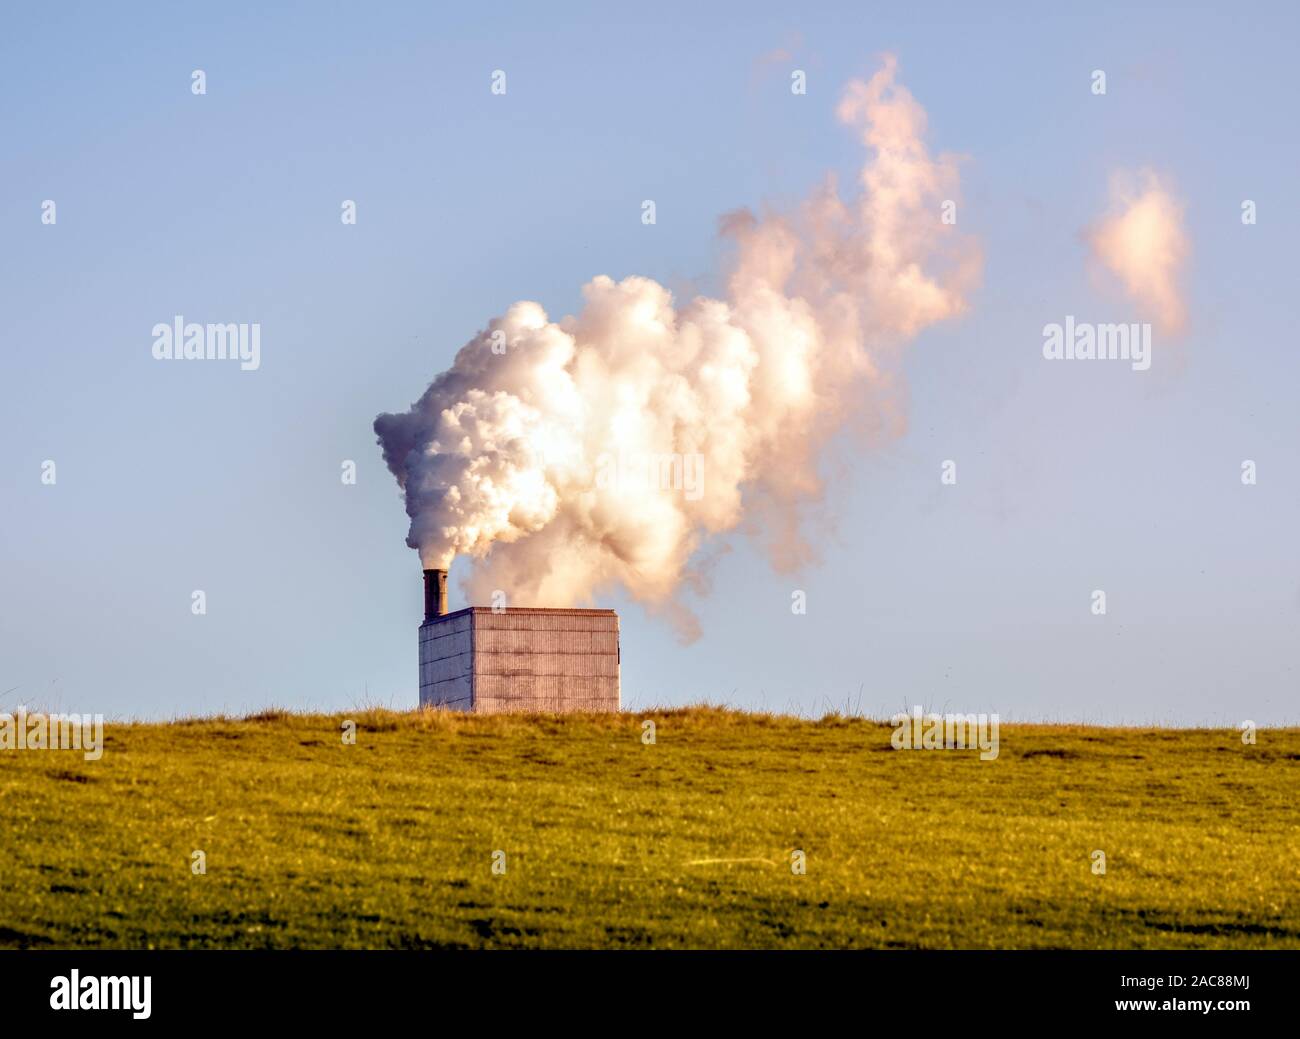 Chimney and water vapour plume at the Dunbar Cement Plant, Dunbar, East Lothian, Scotland, UK Stock Photo